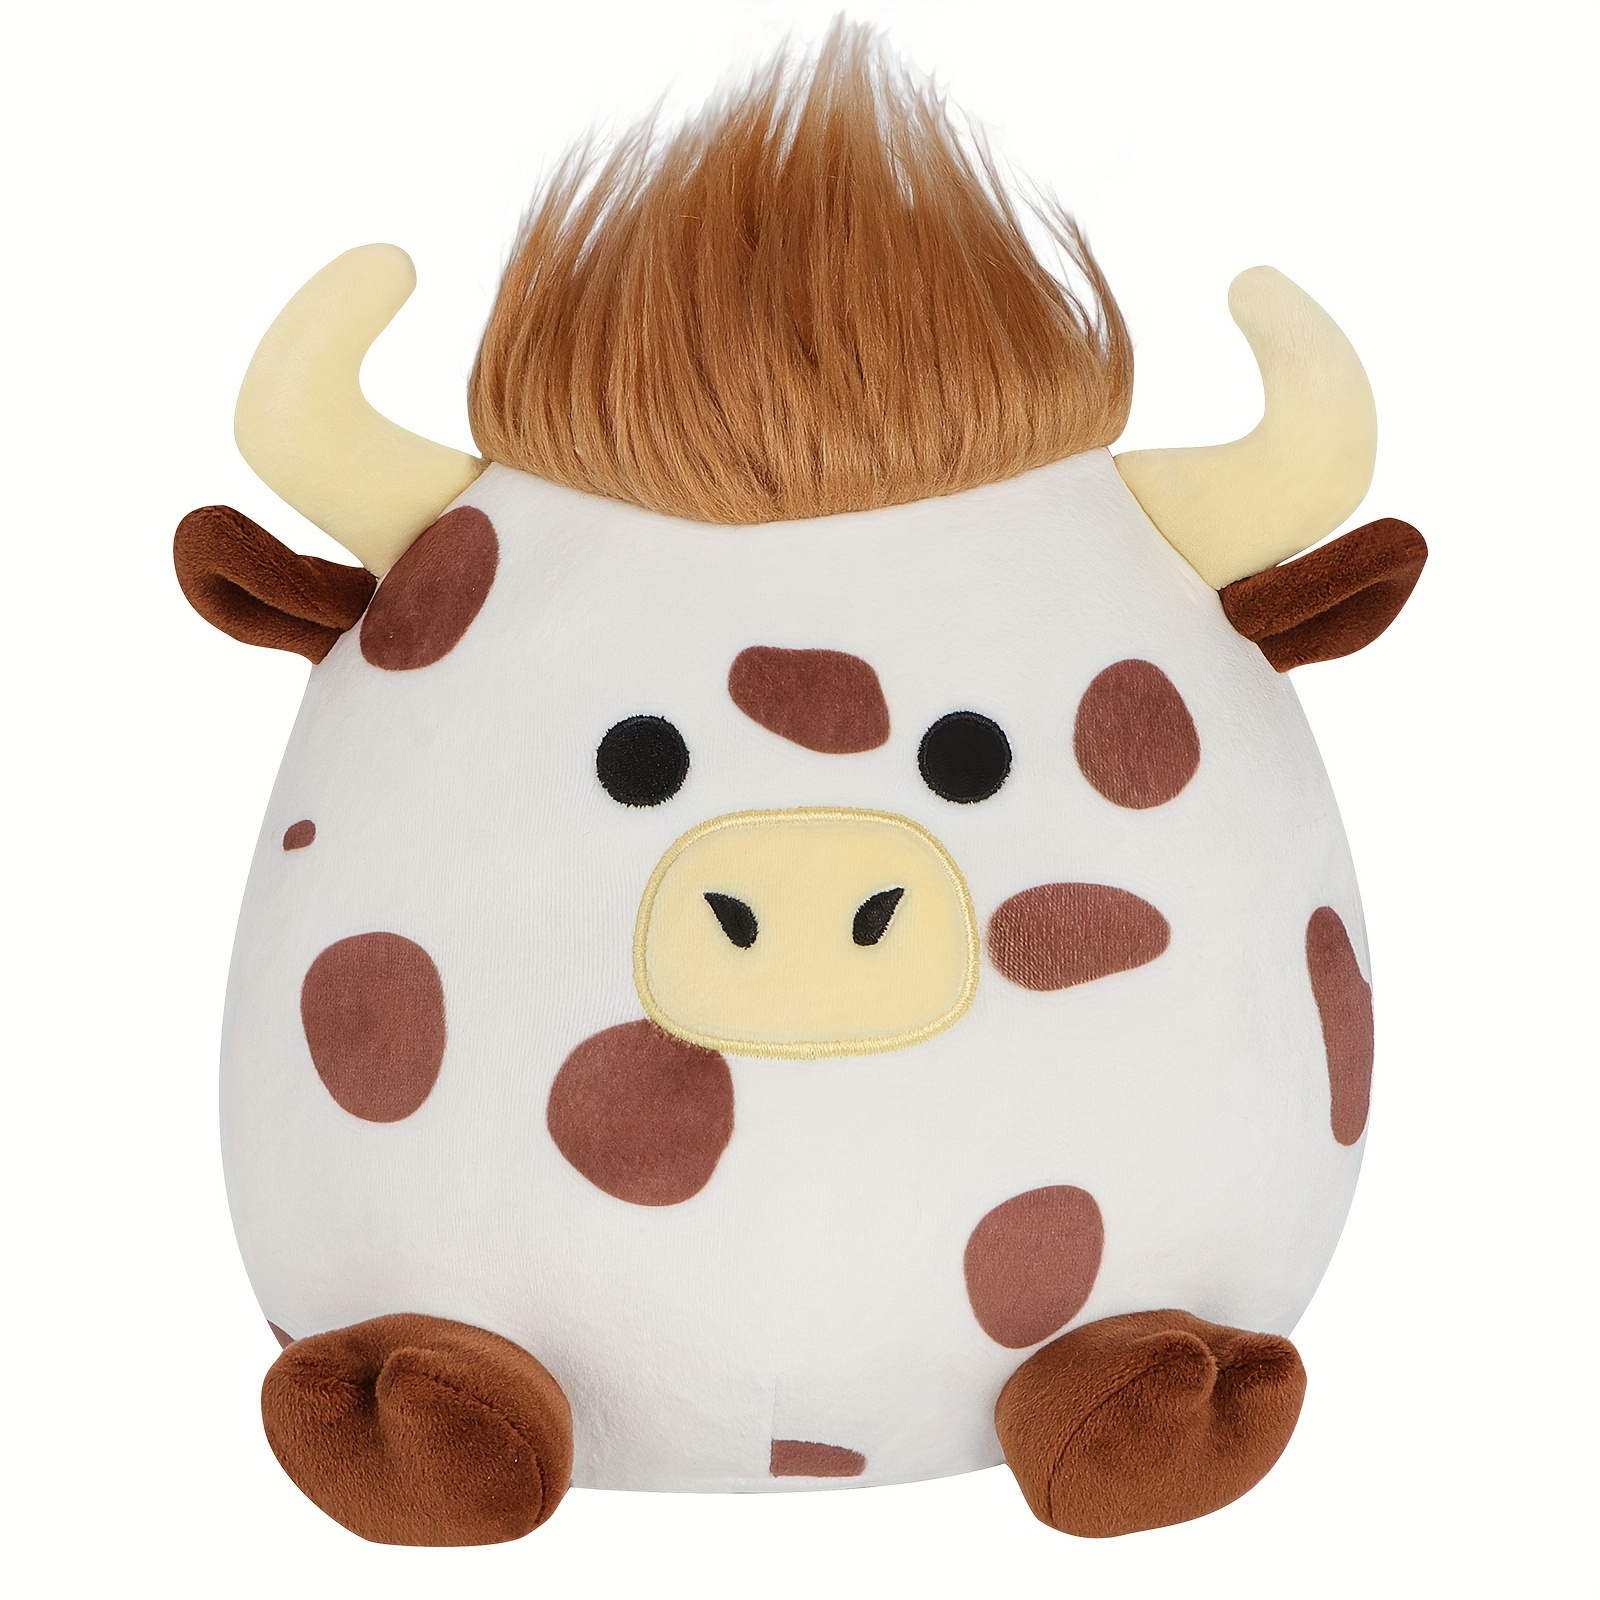 

Apushmeu®10in Milk Cow - Cute Milk Cow Stuffed Animal Soft Hugging For Sleeping Milk Cow Body Pillow -milk Cow Plush Toy, Birthday Christmas Party Gifts For Kids Adults